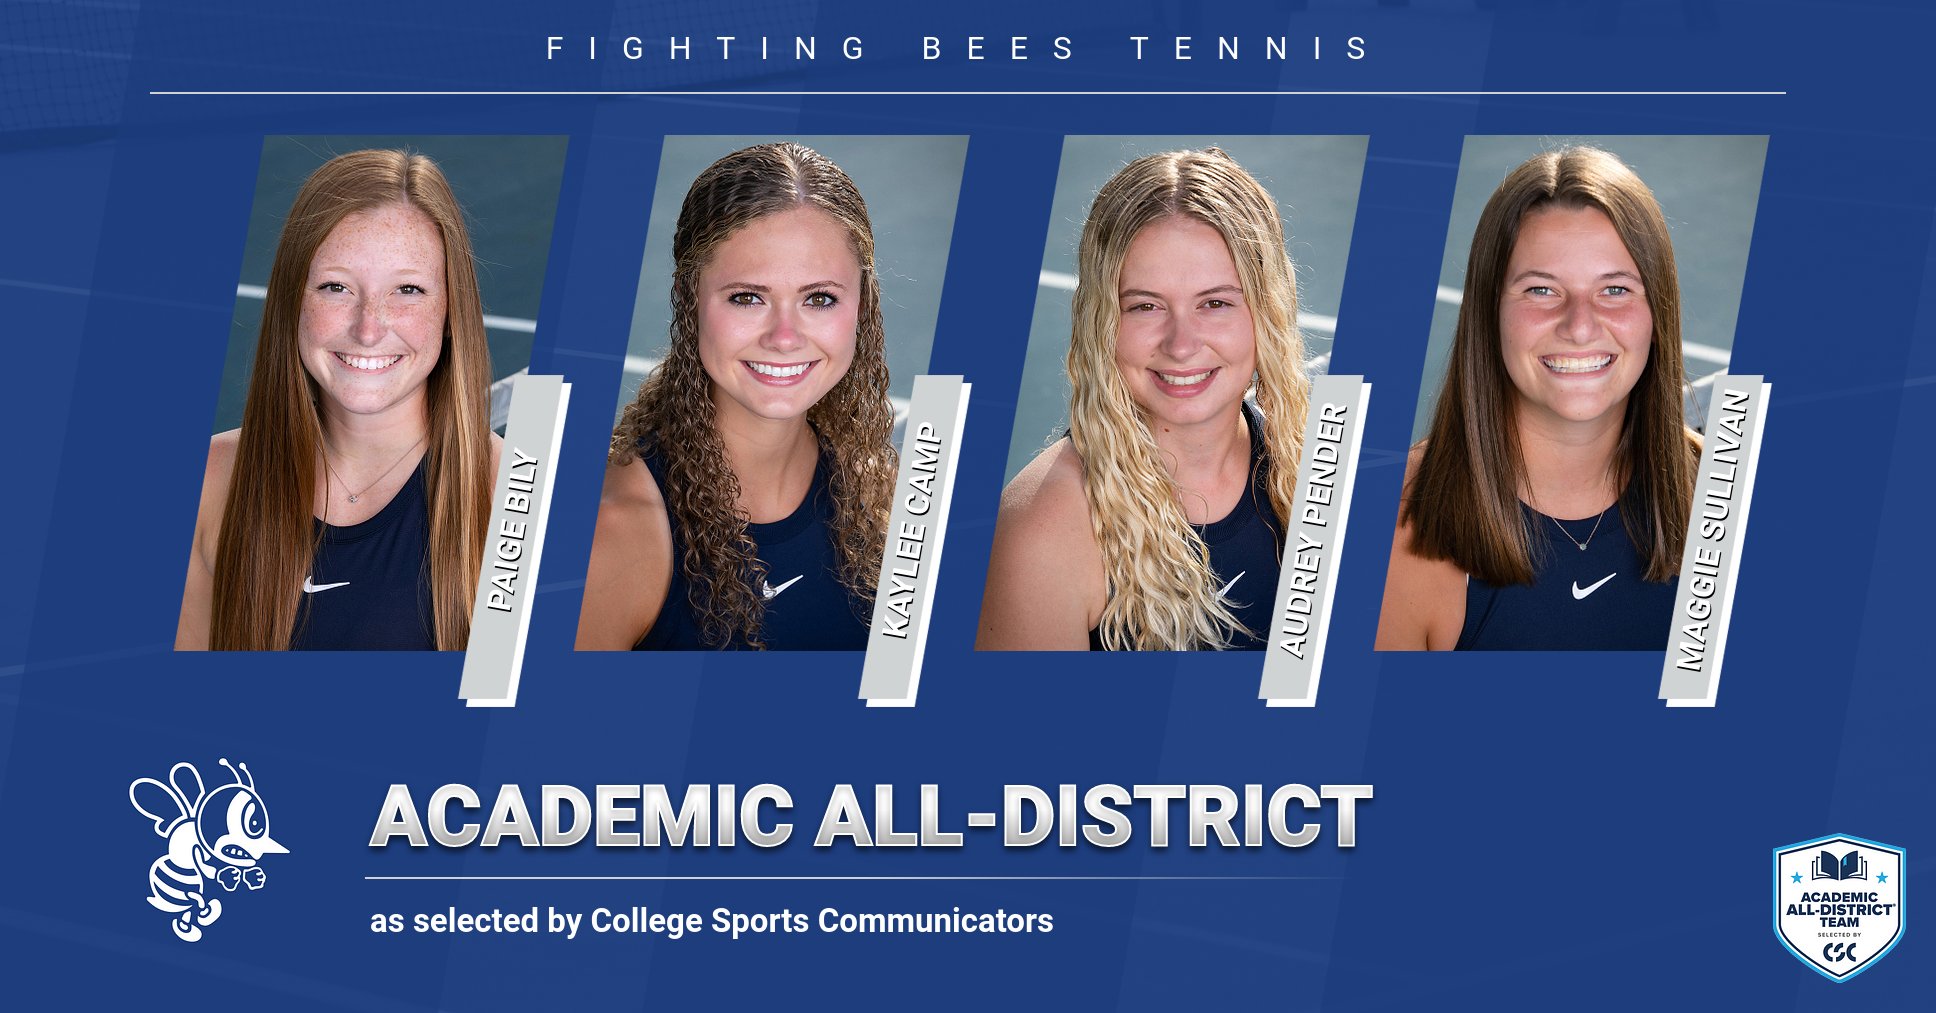 Seven Bees named to Academic All-District Tennis Team